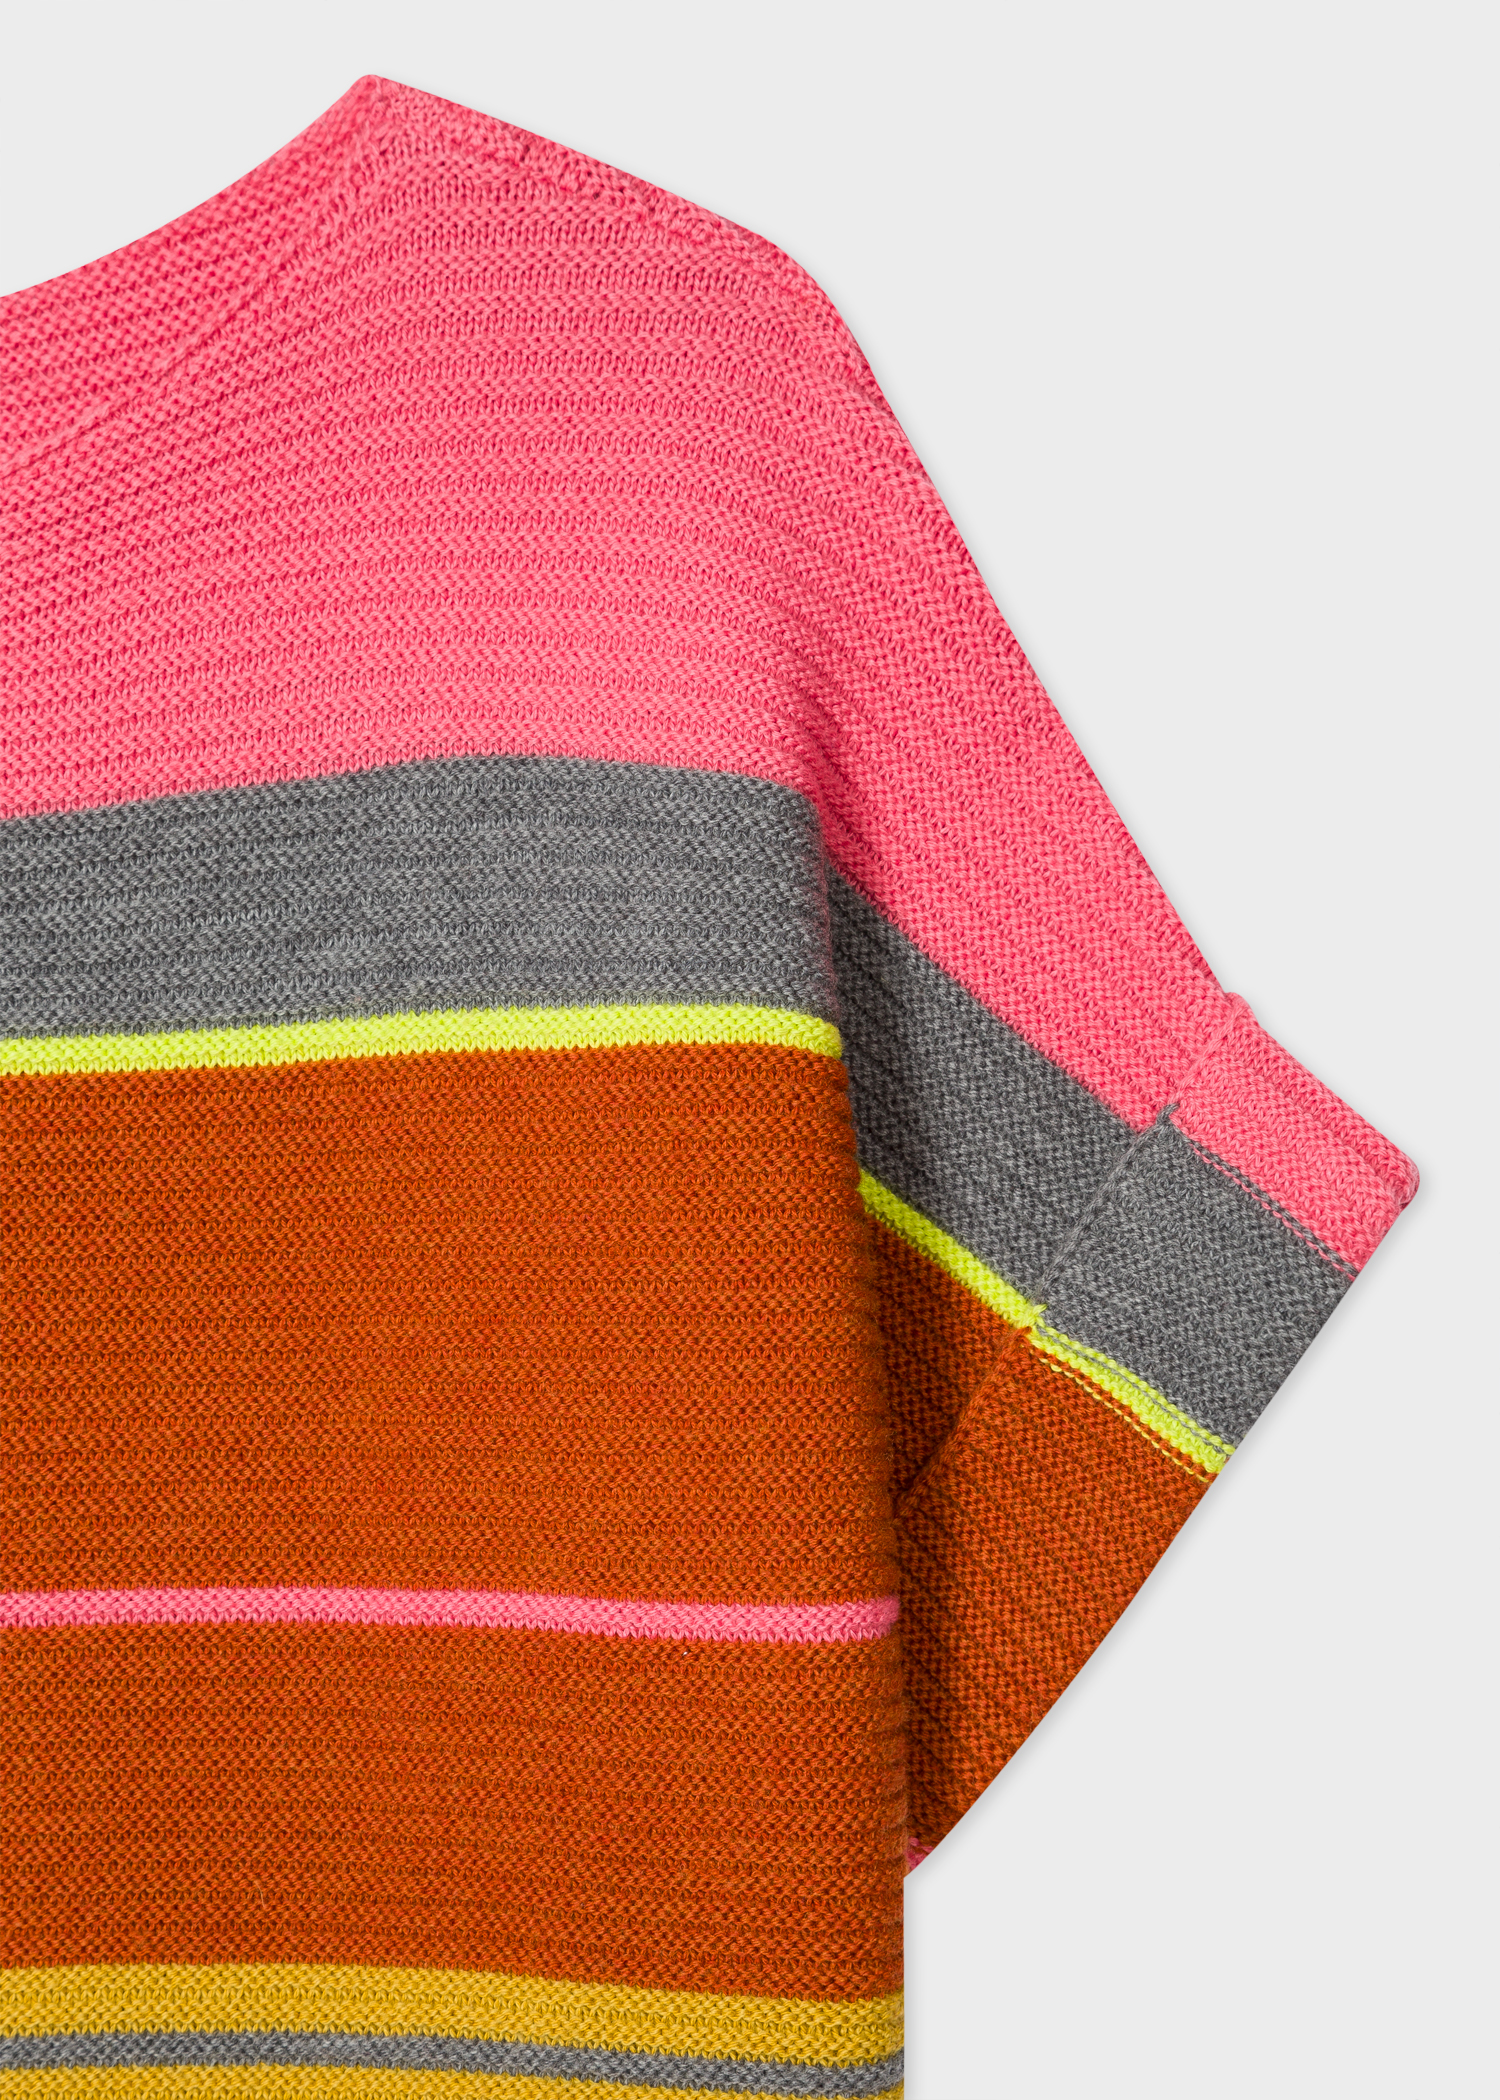 Sleeve detail - Women's Multi-Coloured Stripe Wool And Cotton-Blend Short-Sleeve Sweater Paul Smith